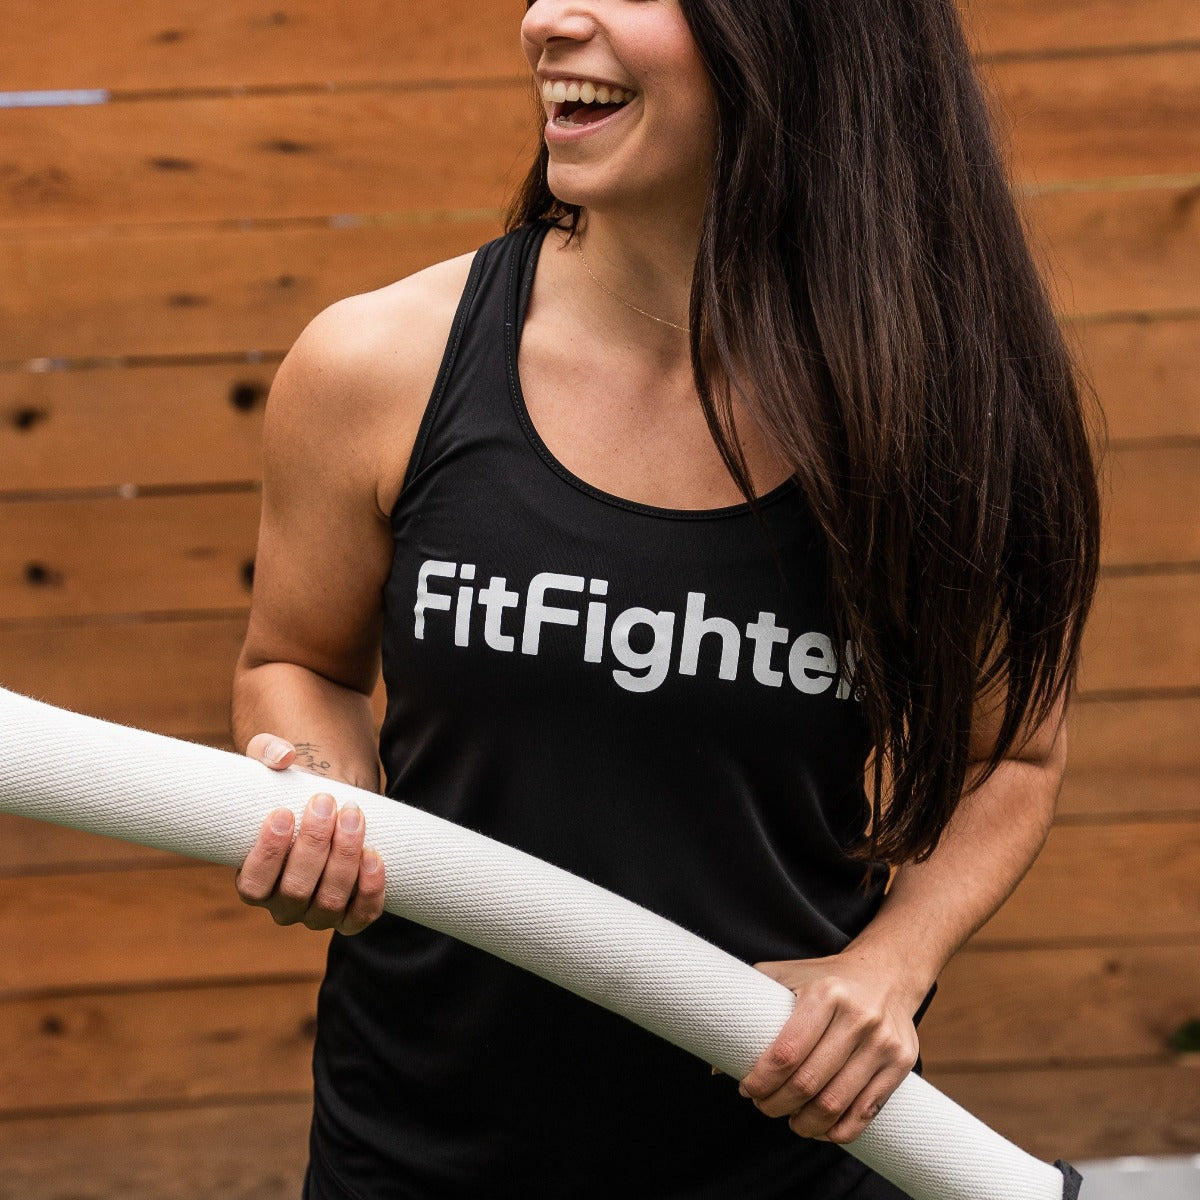 FitFighter